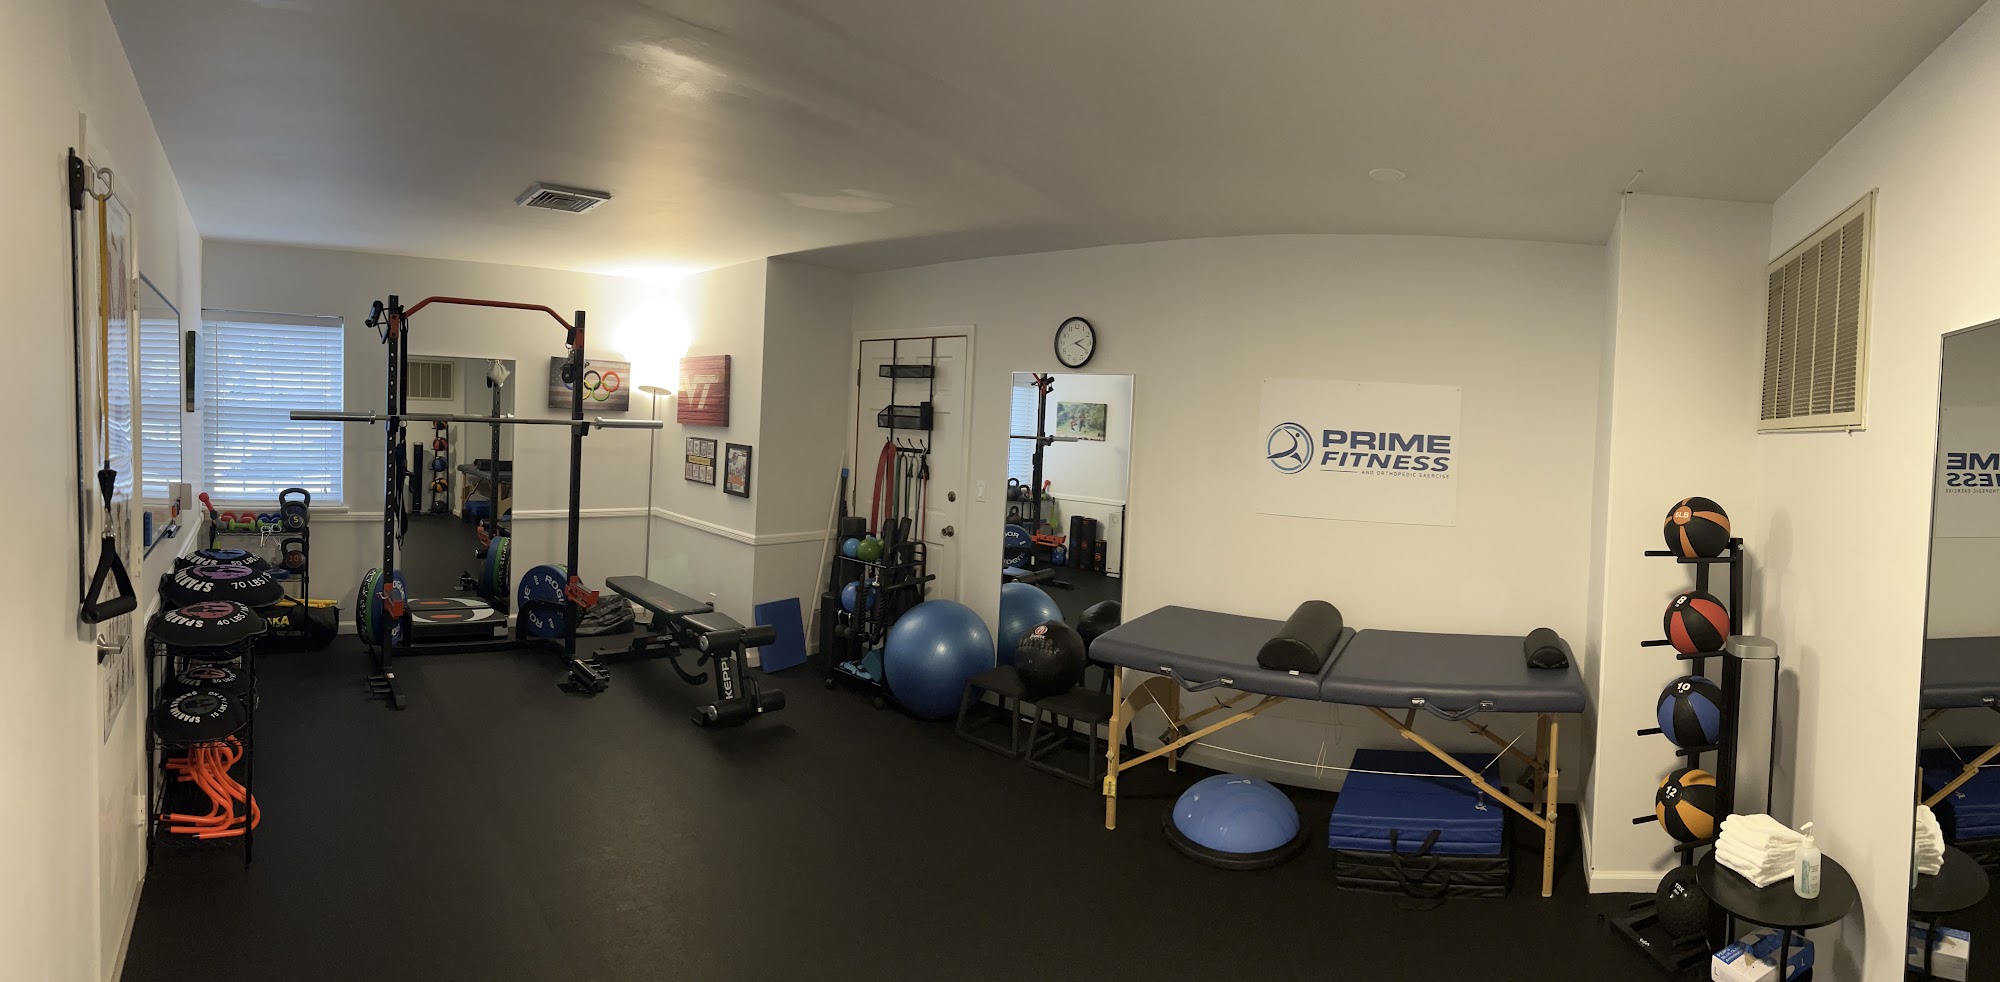 PRIME Fitness and Orthopedic Exercise